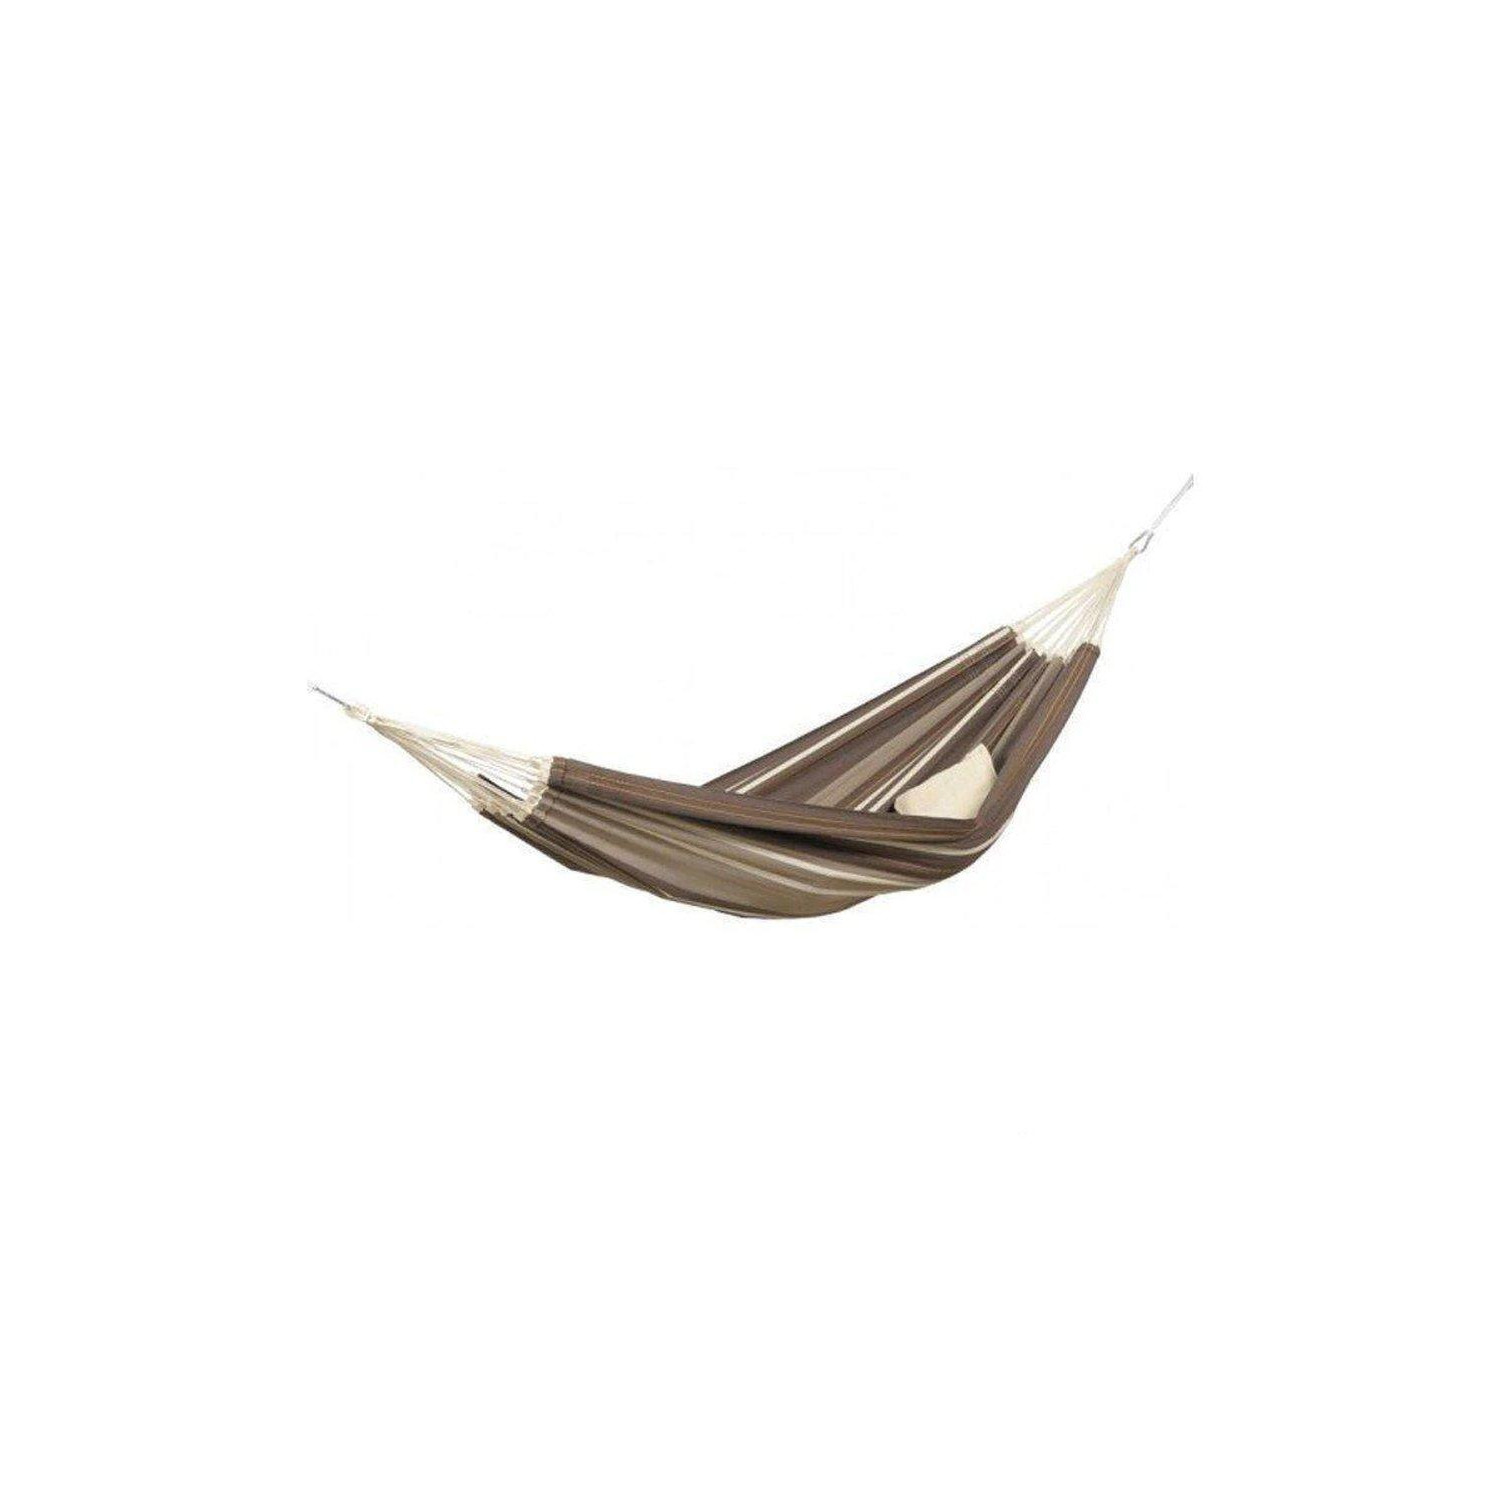 Paradiso Family Sized Handcraftec Garden Hammock with Bag -  Cafe - image 1